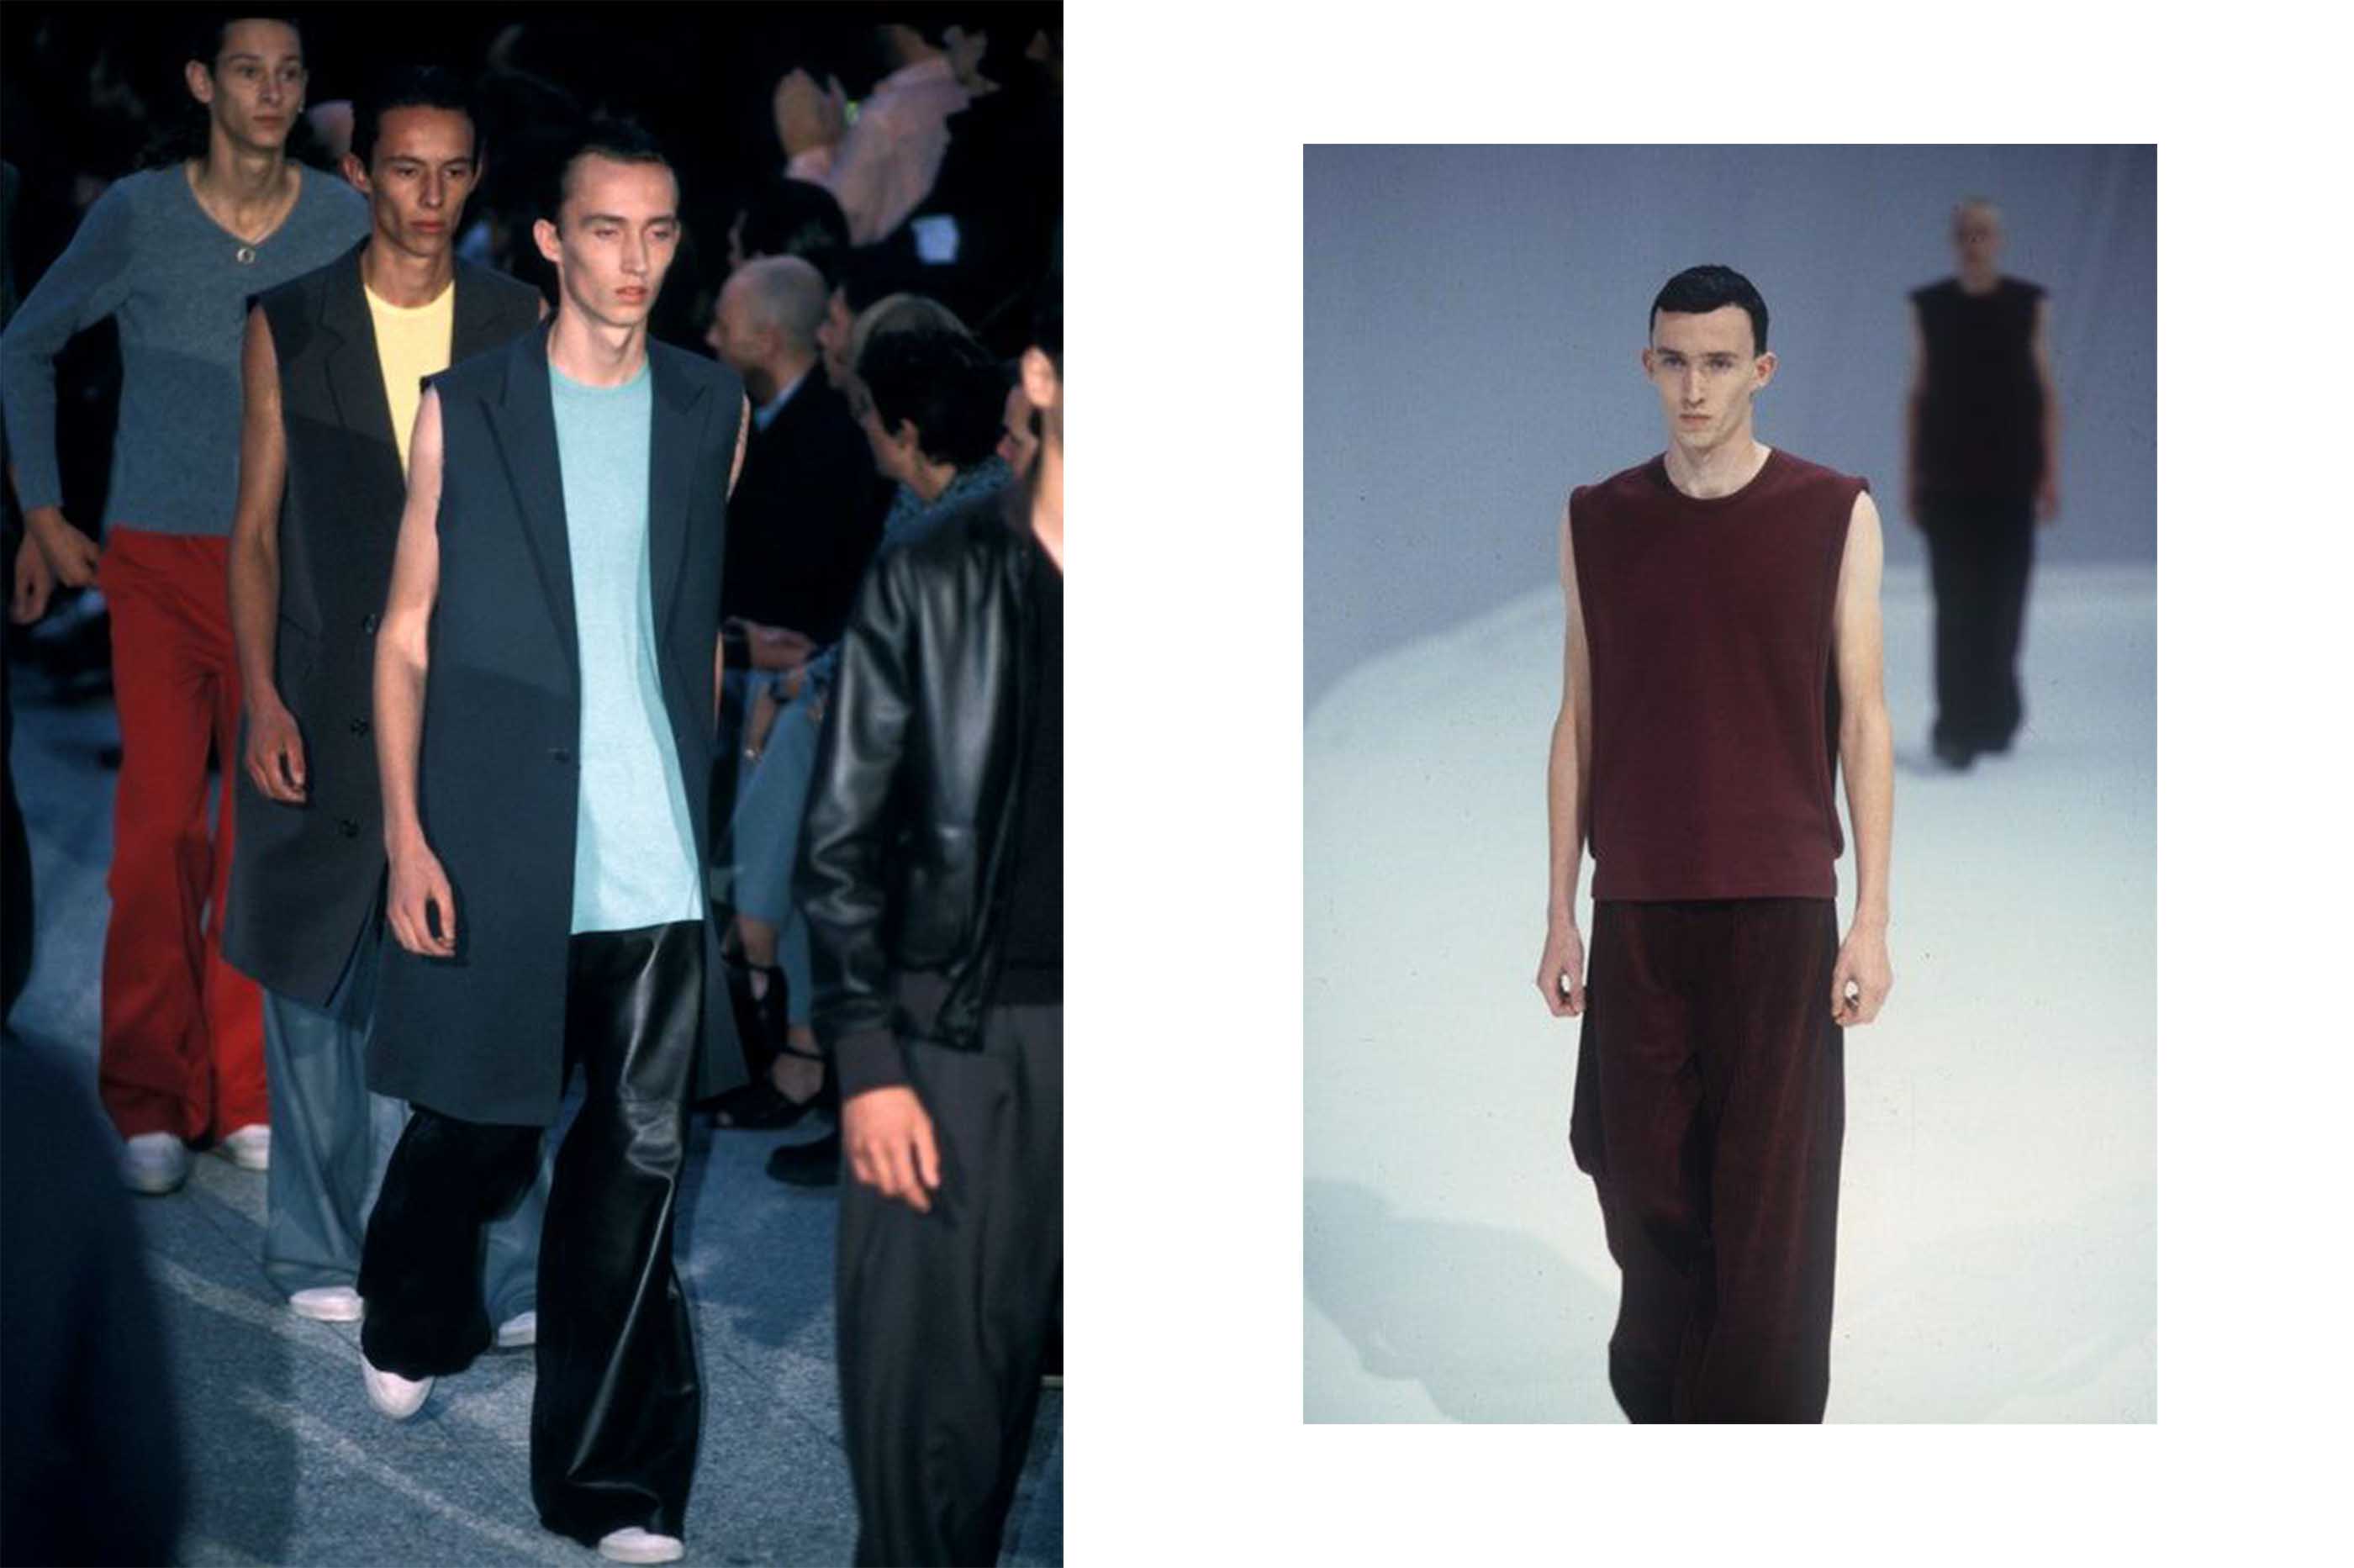 Raf Simons closes his eponymous brand after 27 years